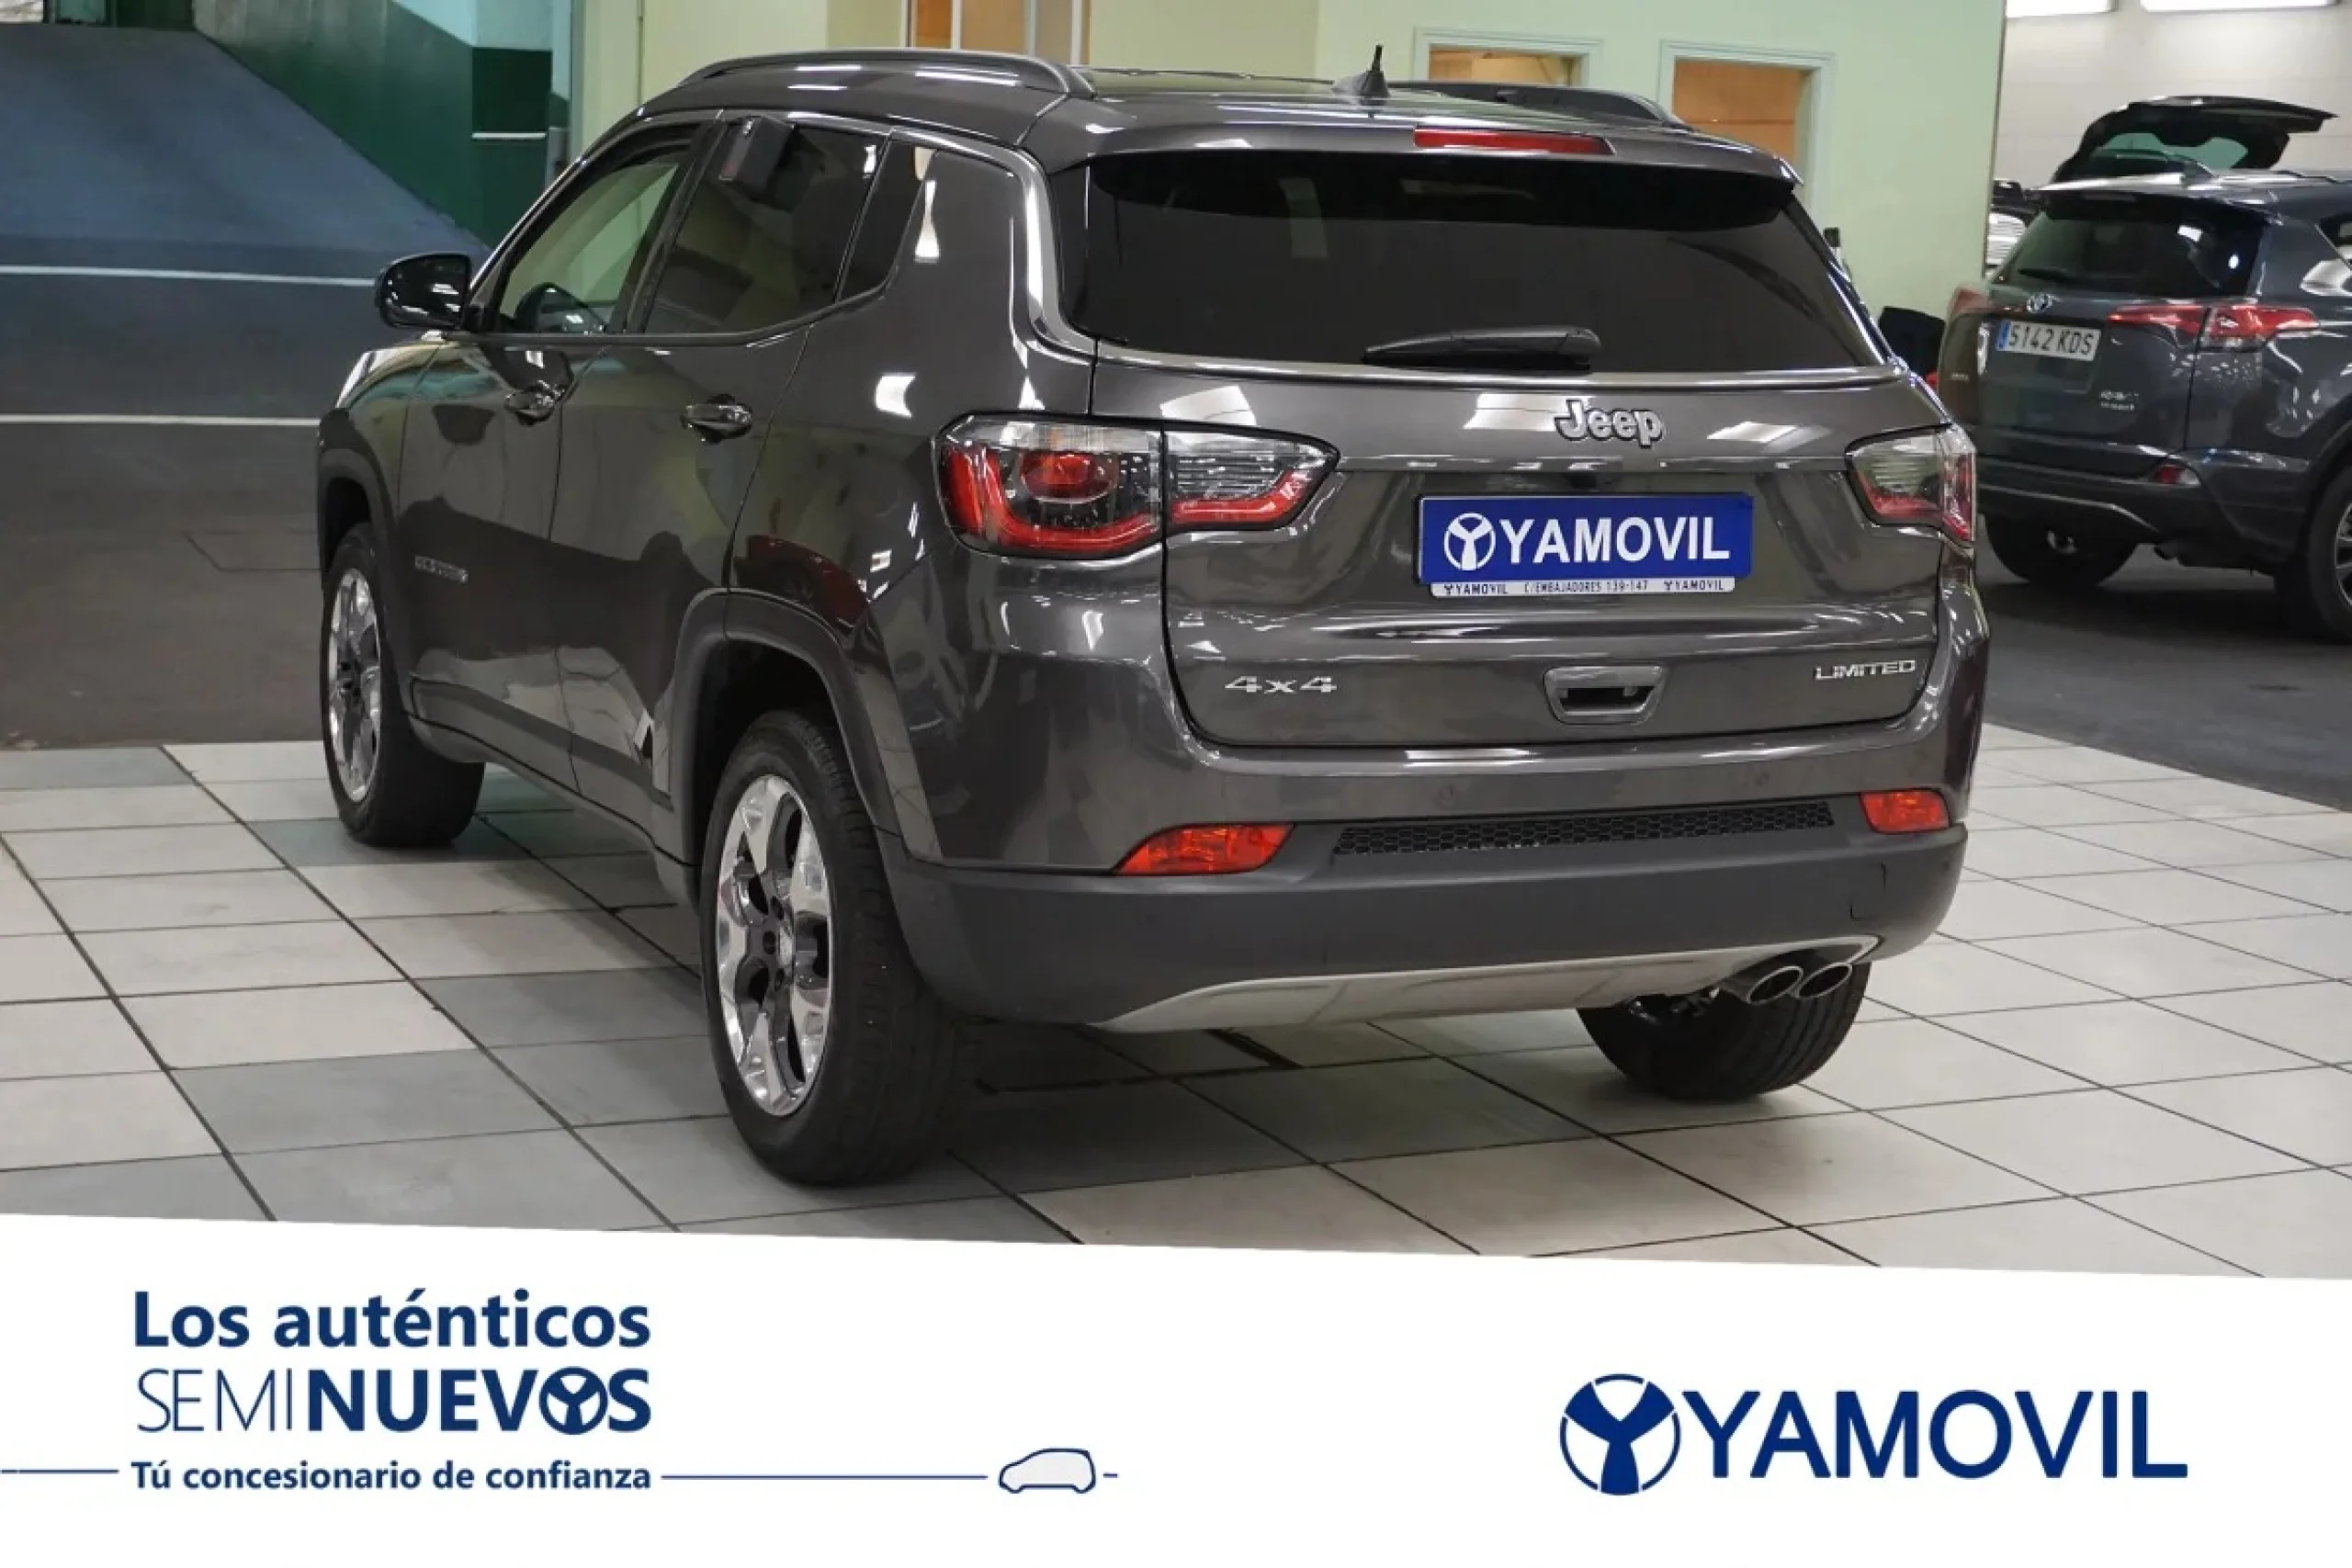 Jeep Compass 1.4 Multiair Limited 4x4 AD Auto 125 kW (170 CV) - Foto 6